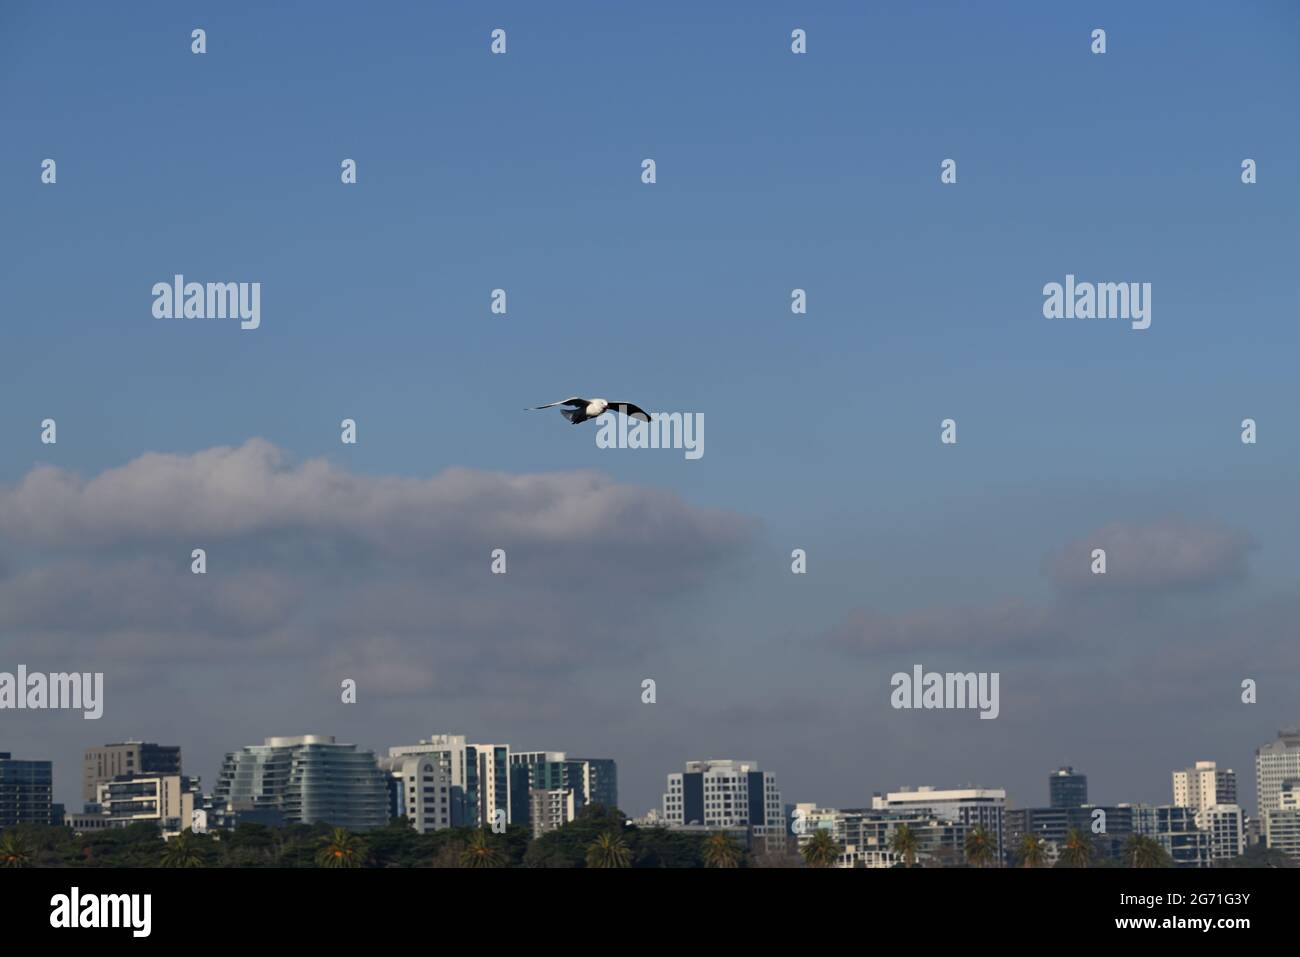 An adult silver gull, commonly known as a seagull, in flight, with clouds and a city skyline in the background Stock Photo